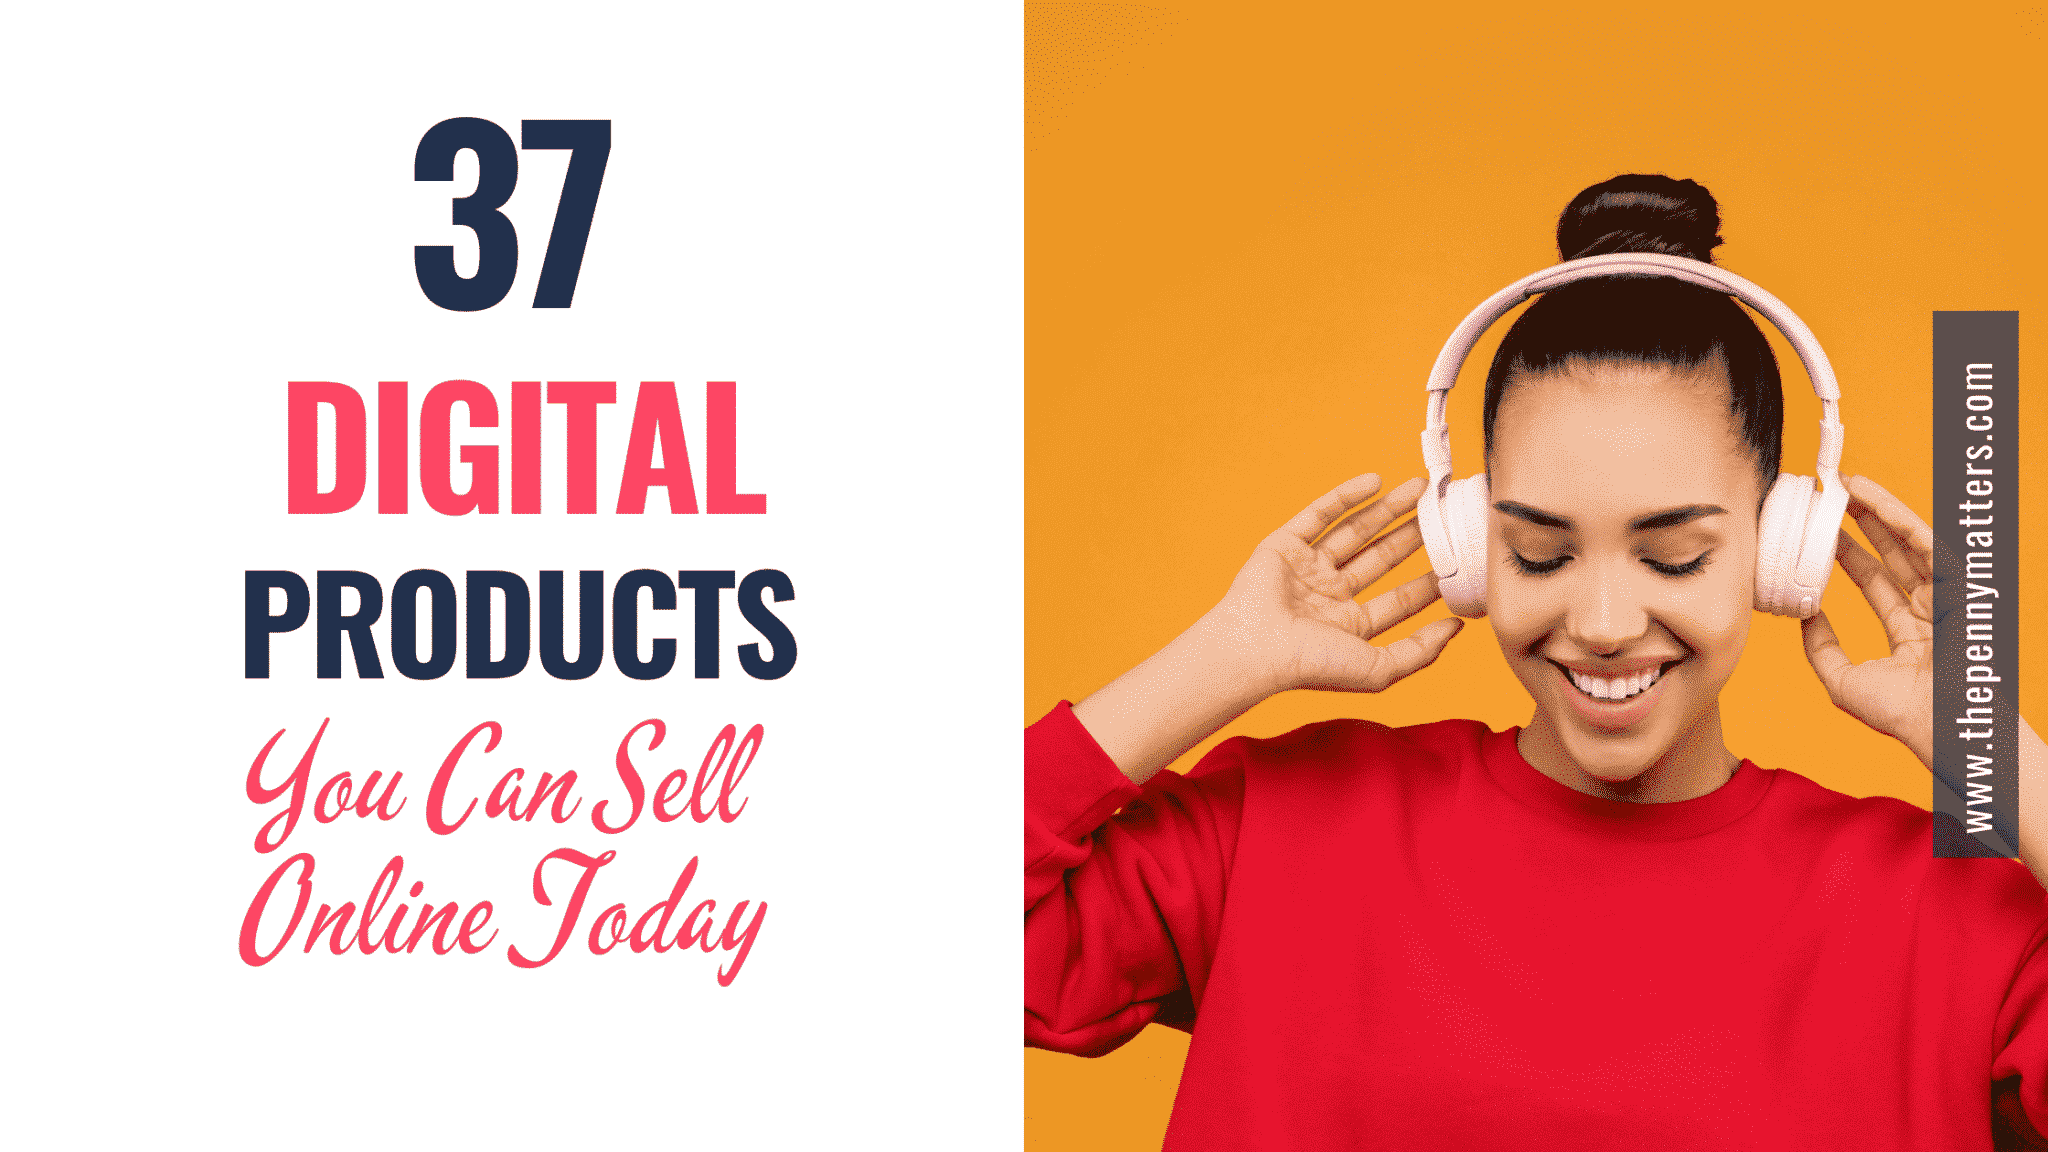 37 Digital Products to Sell and Make Money Online